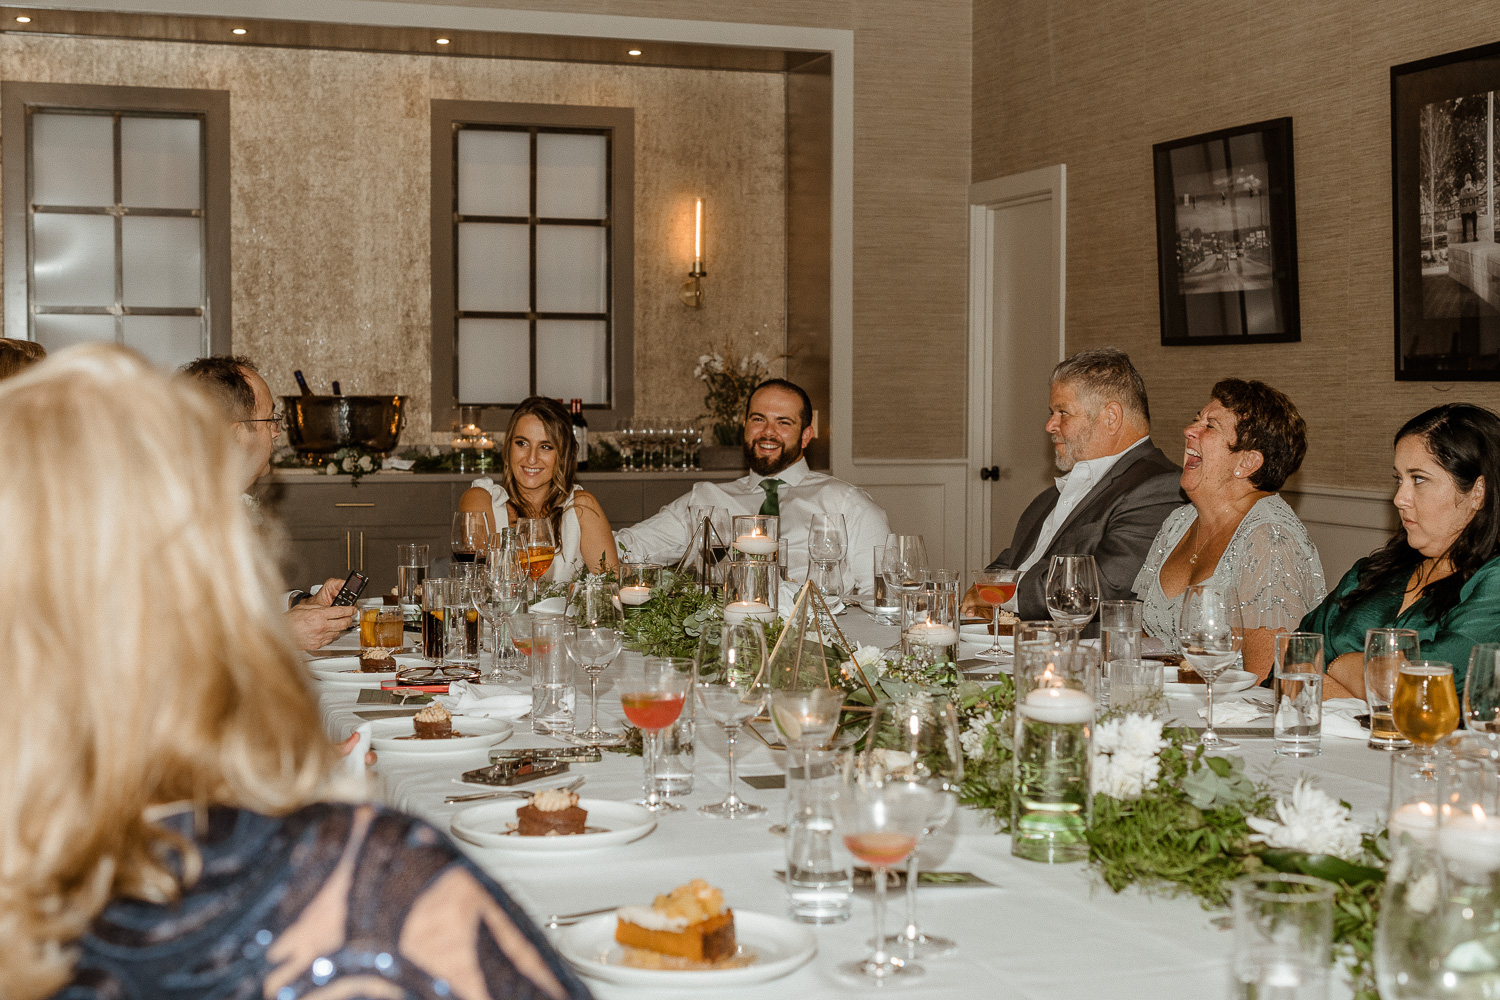 The guests laugh during speeches from the parents after the Asheville elopement